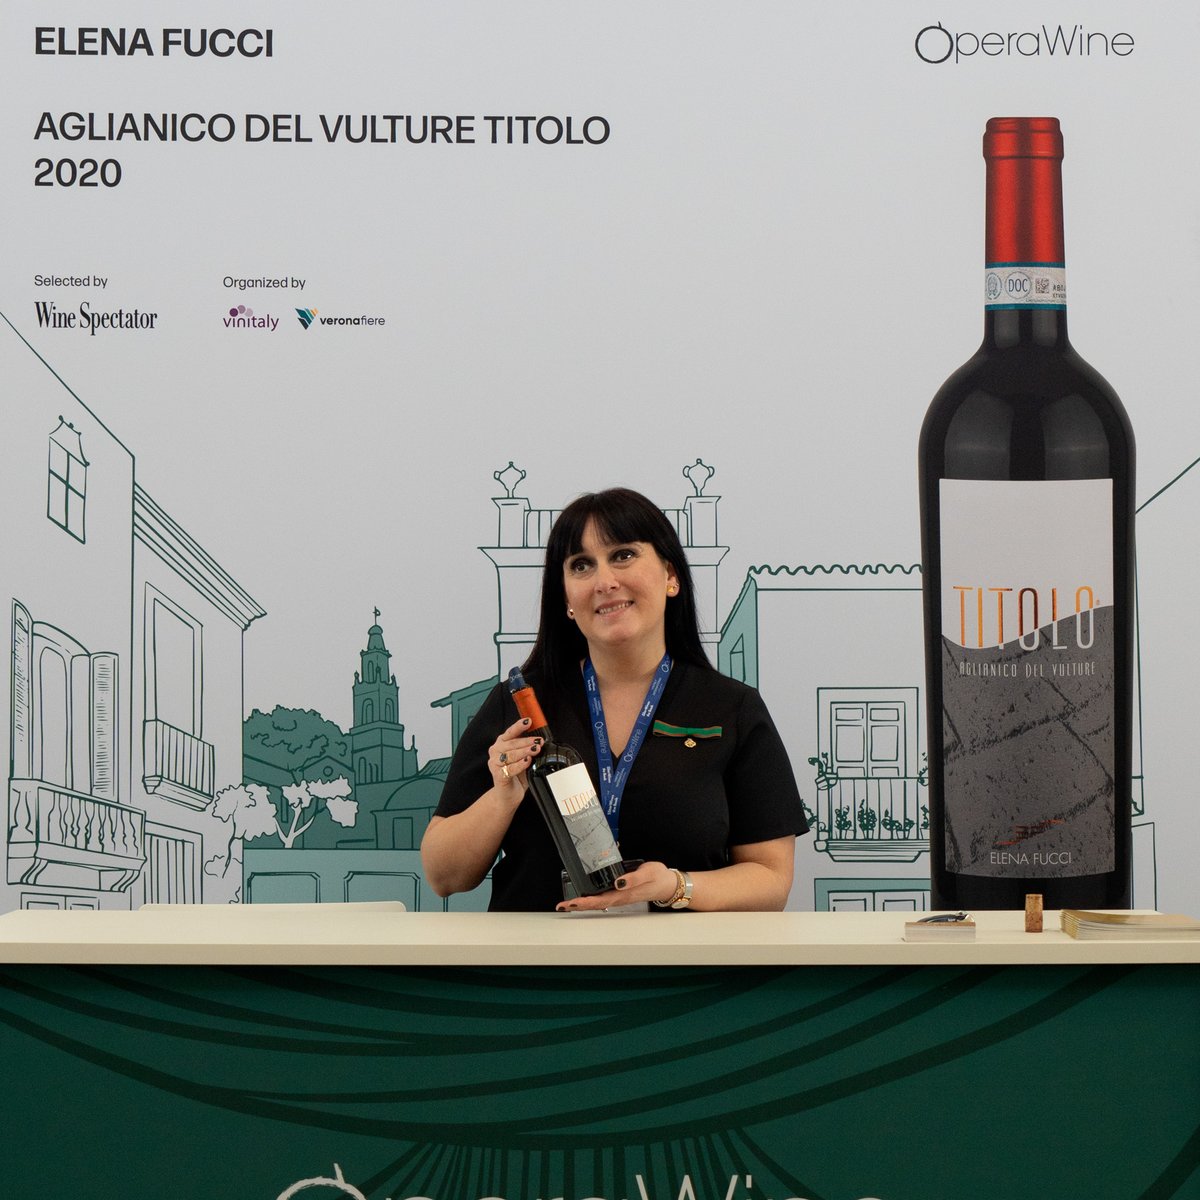 Here is the portrait of @elena_fucci, one of the great Italian producers selected by Wine Spectator for #OperaWine2024. During this year's Grand Tasting, they shared with guests their Aglianico del Vulture Titolo 2020. Congratulations! #OperaWine #Vinitaly2024 #finestitalianwines